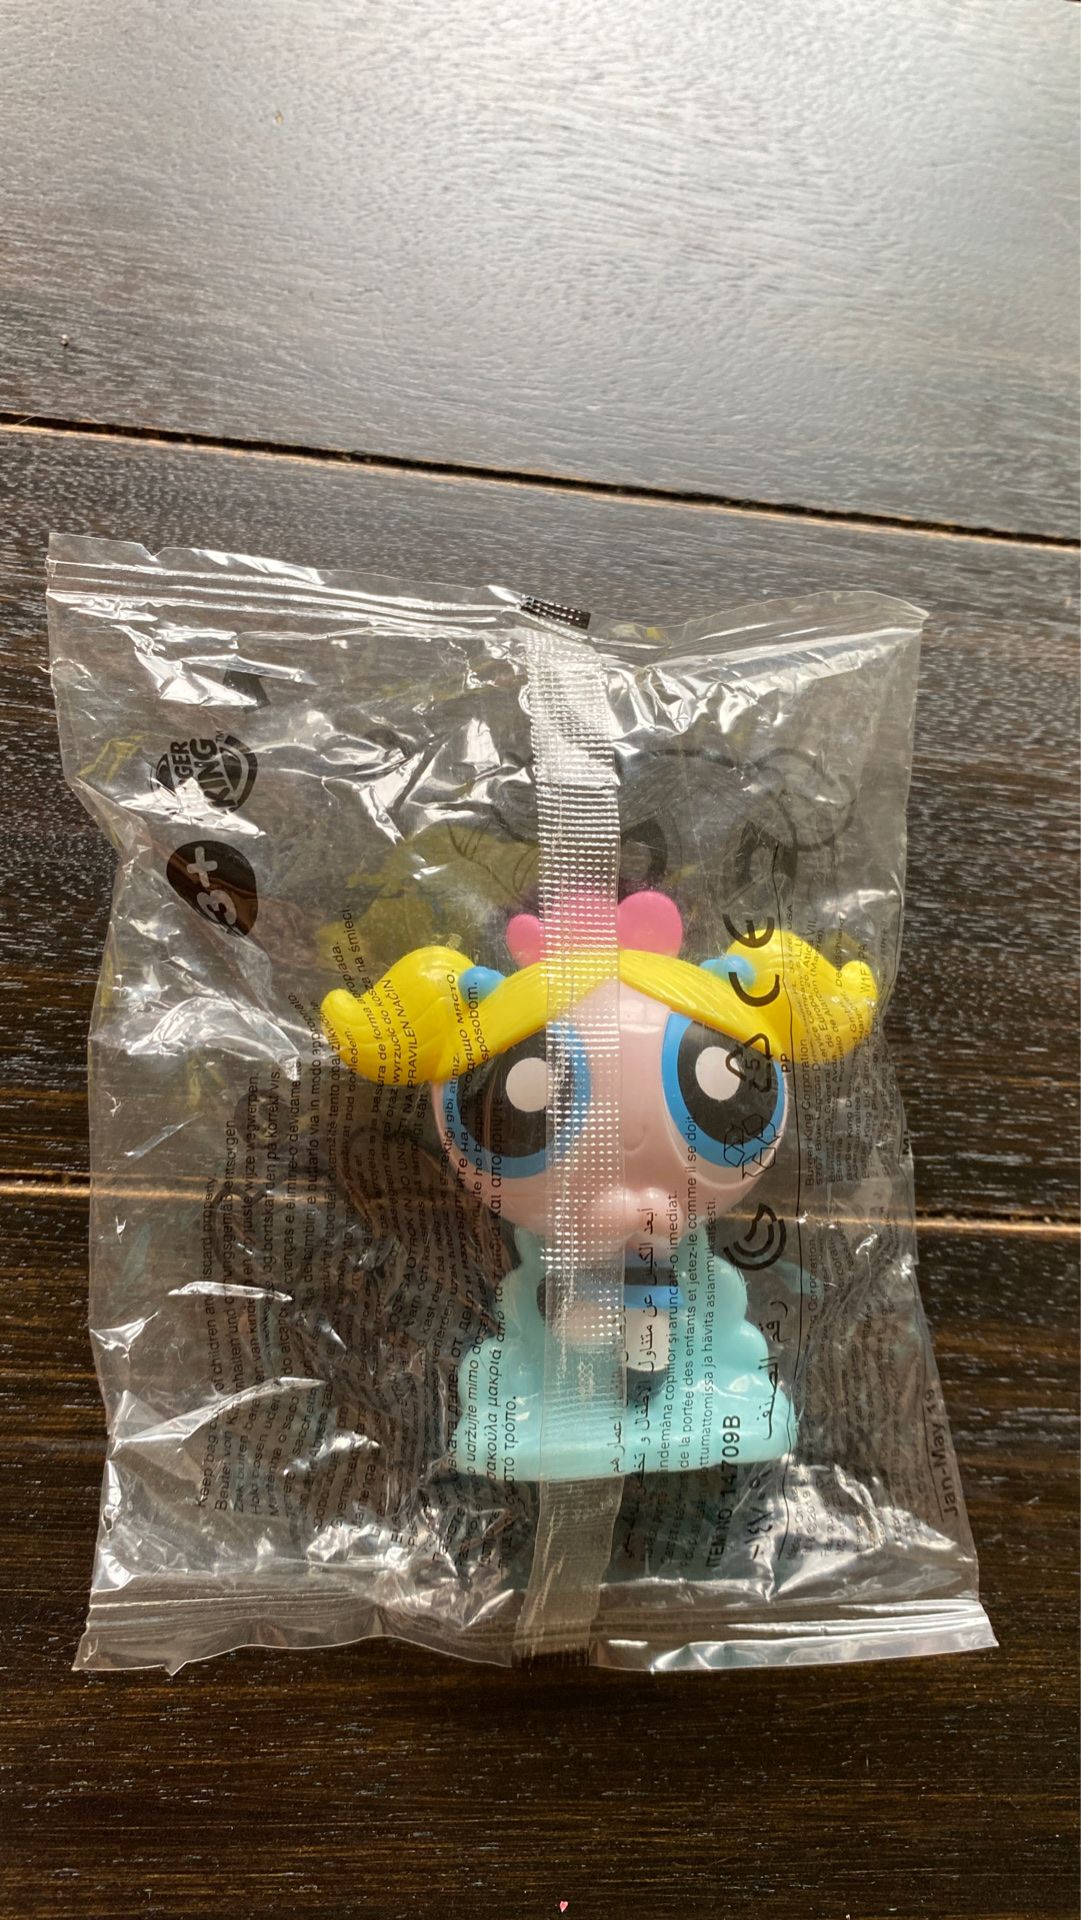 Powderpuff plastic collectible toy